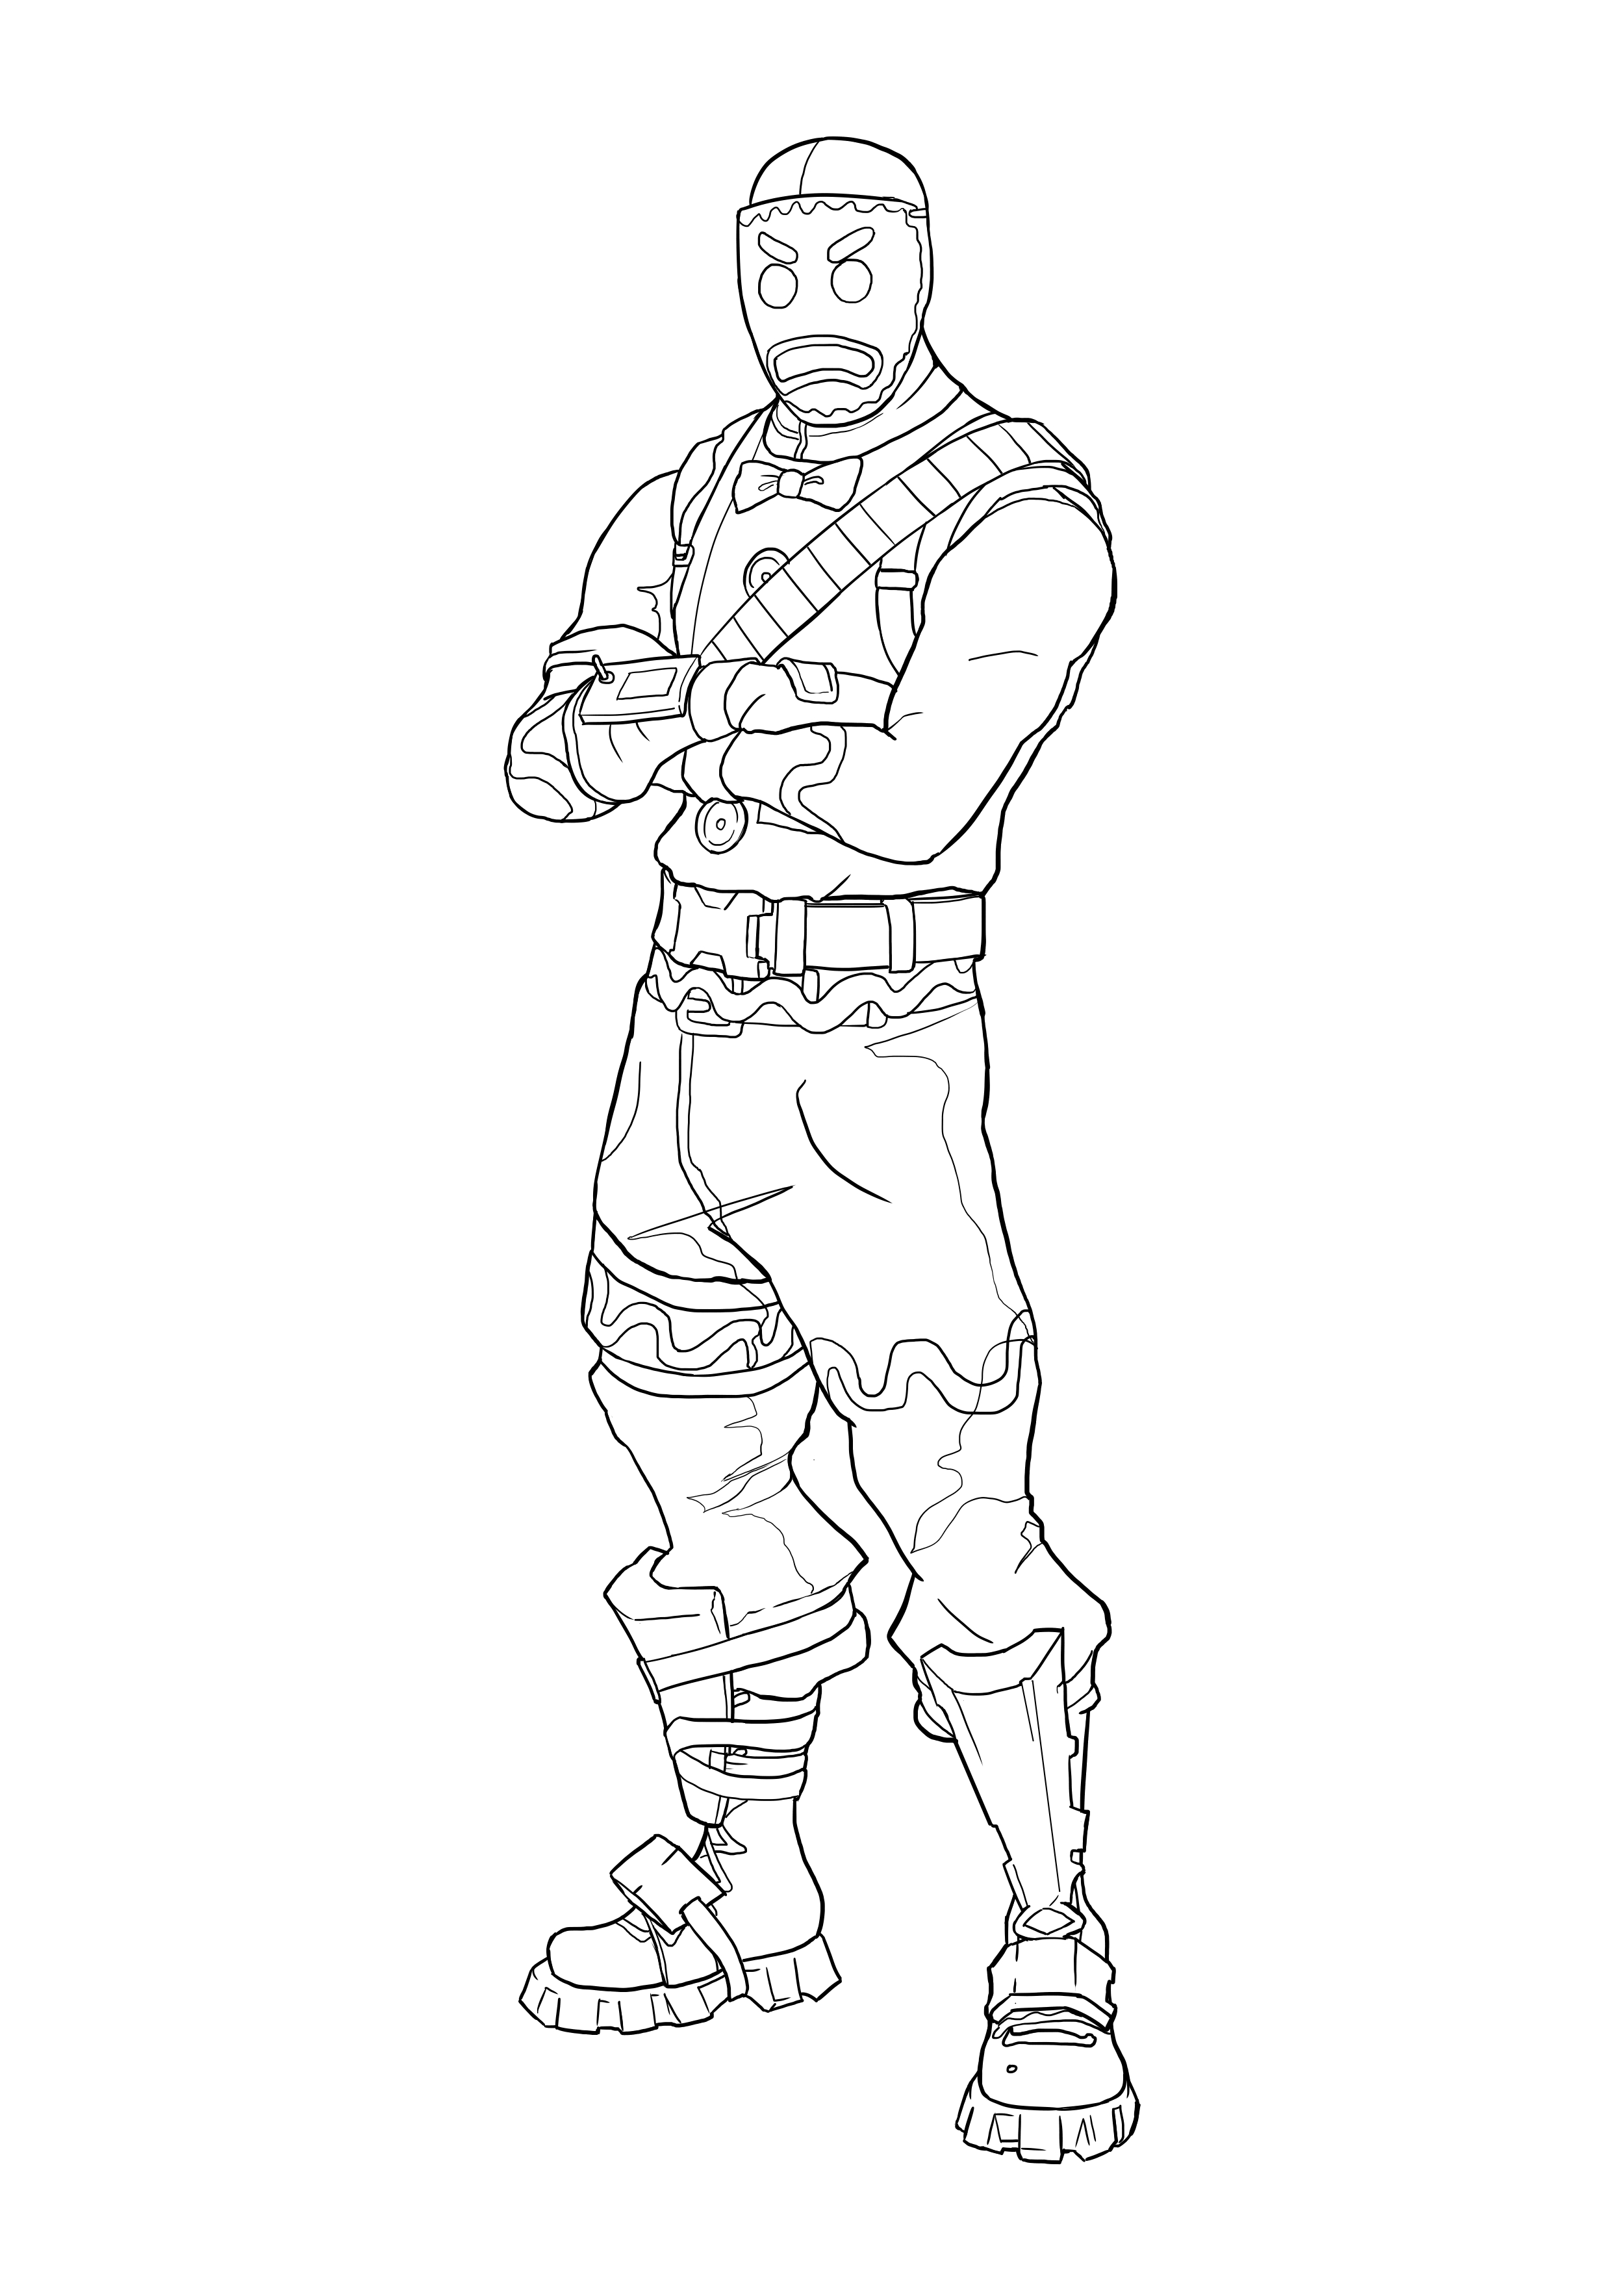 Fortnite Coloring Pages [25+ Free - Ultra High Resolution] - Man In The